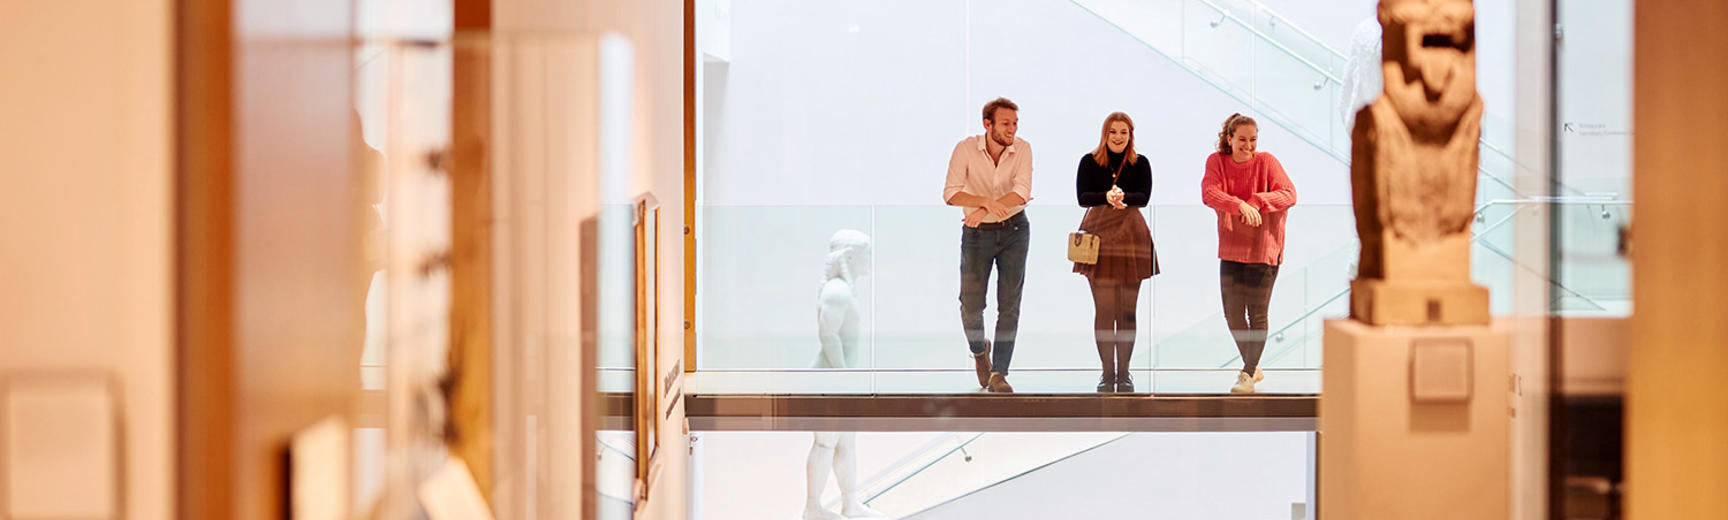 Visitors in the atrium looking down at the galleries from the central walkway